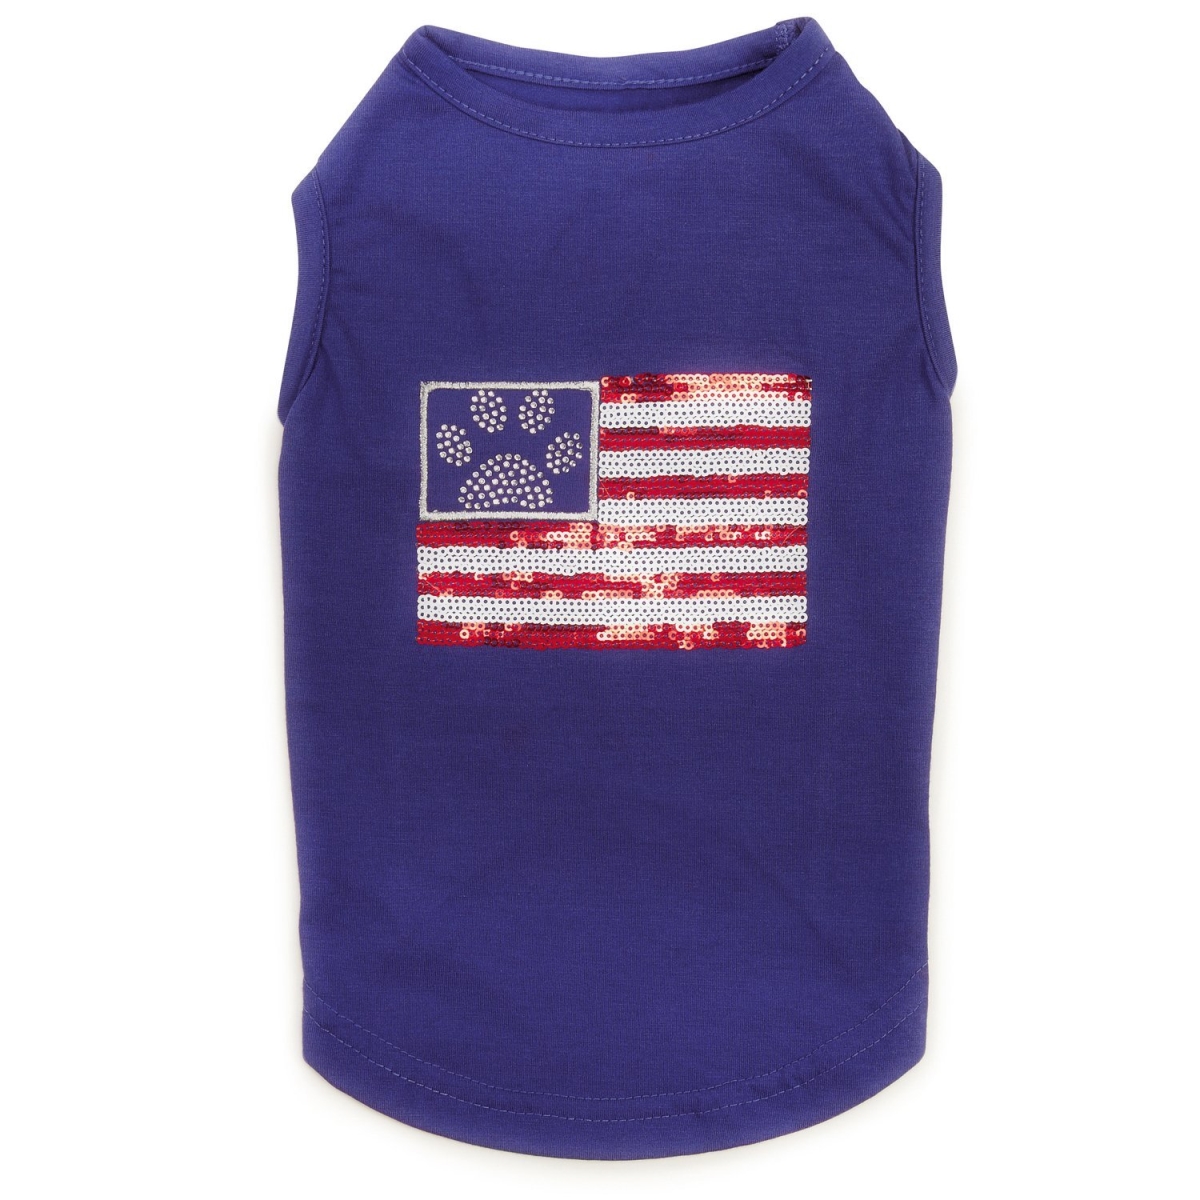 Zack & Zoey Sequin Flag Upf40 Tank Top For Dogs, Blue - Small & Medium